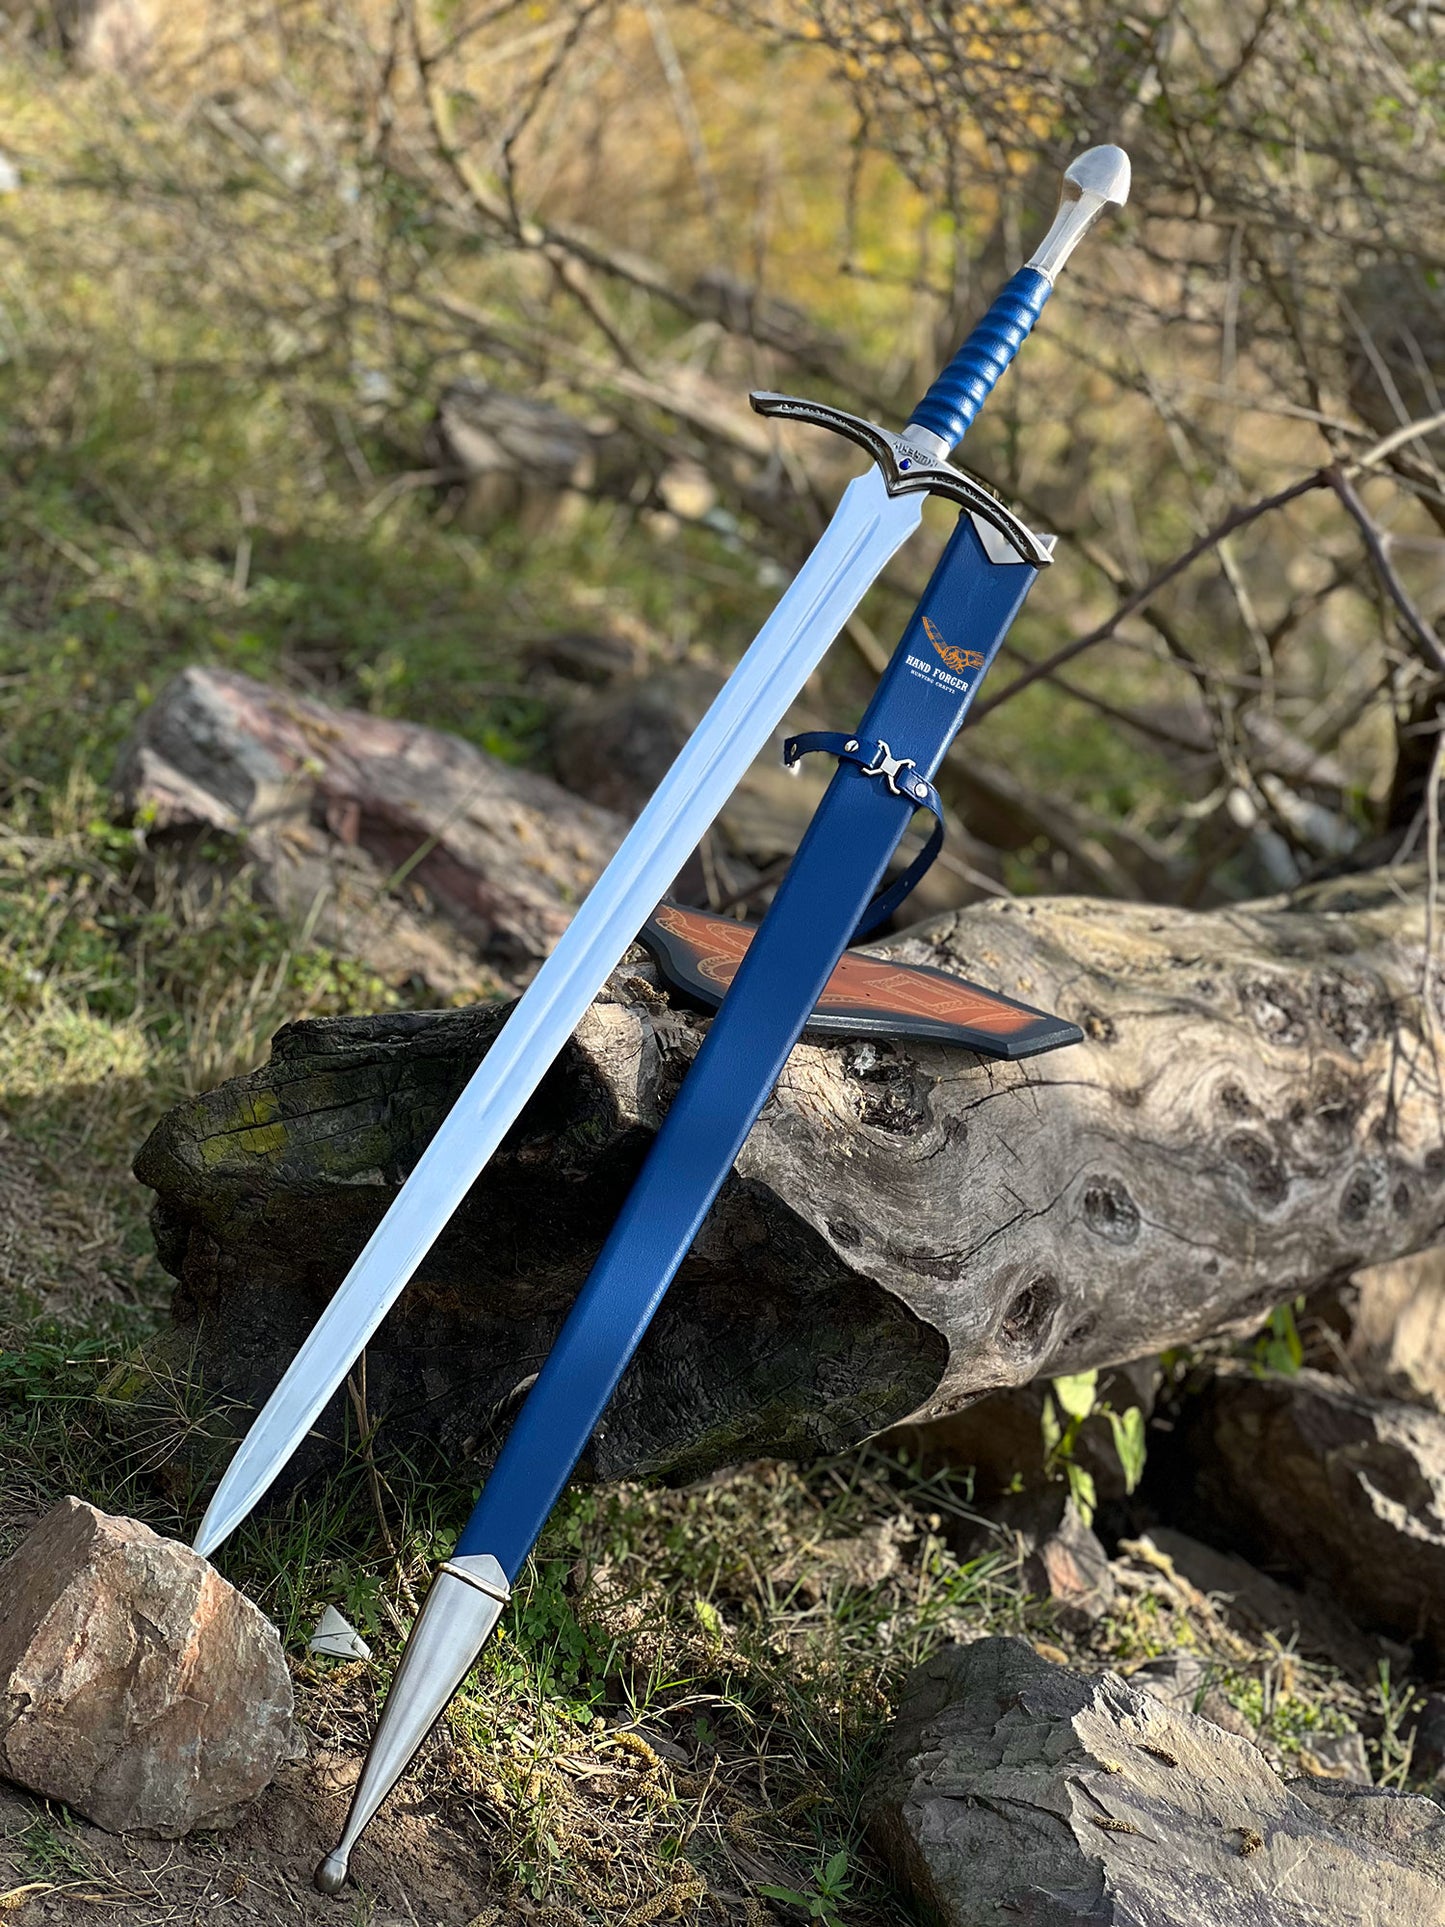 Detailed replica of Blue Gandalf's sword from The Hobbit, perfect for display. Hand-forged with a 42-inch blade